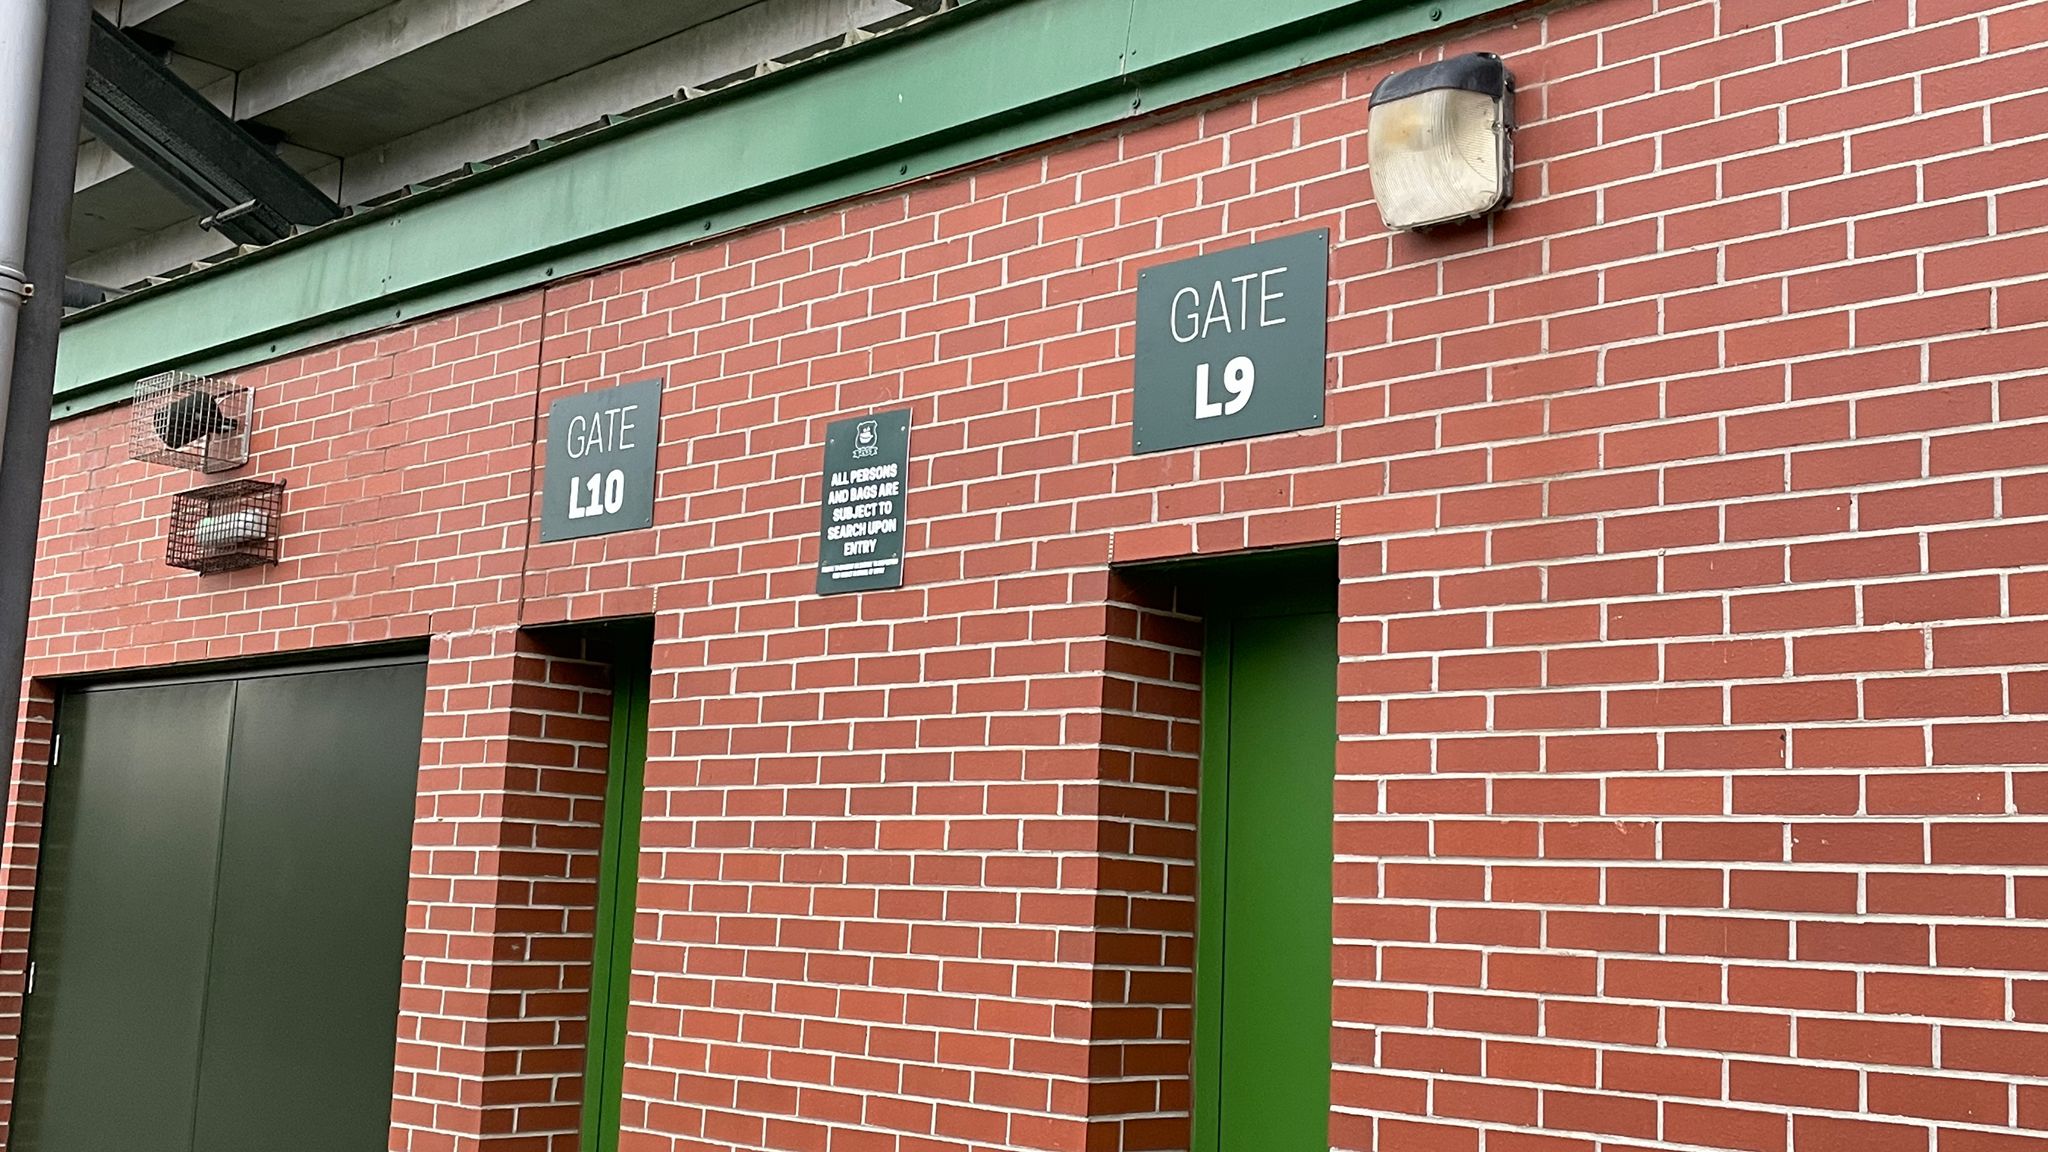 New gate signage at Home Park